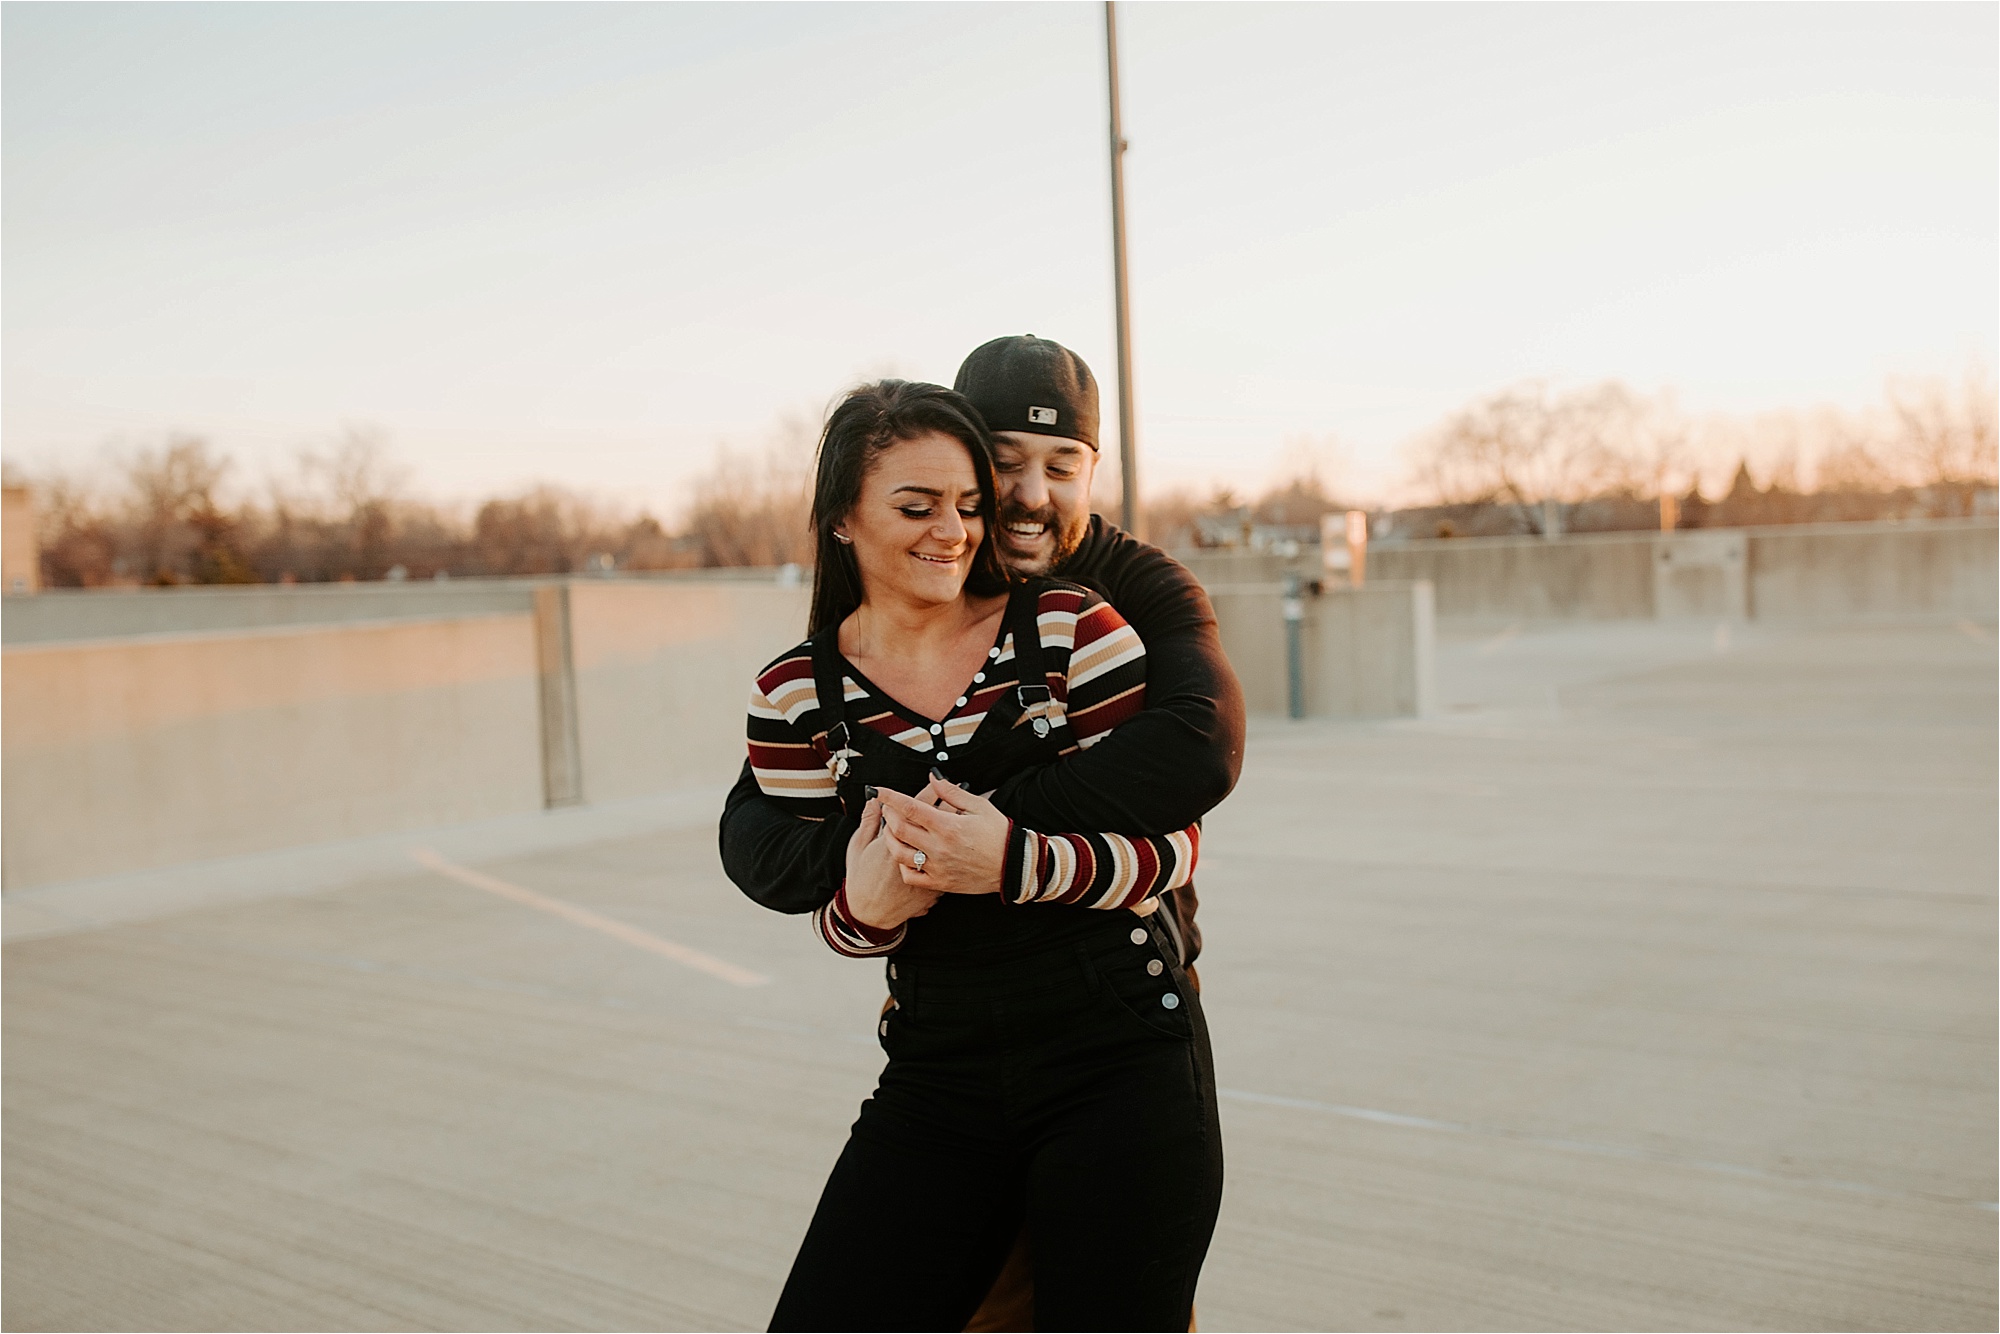 Playful Sunset Engagement Session in Downtown Kankakee Illinois